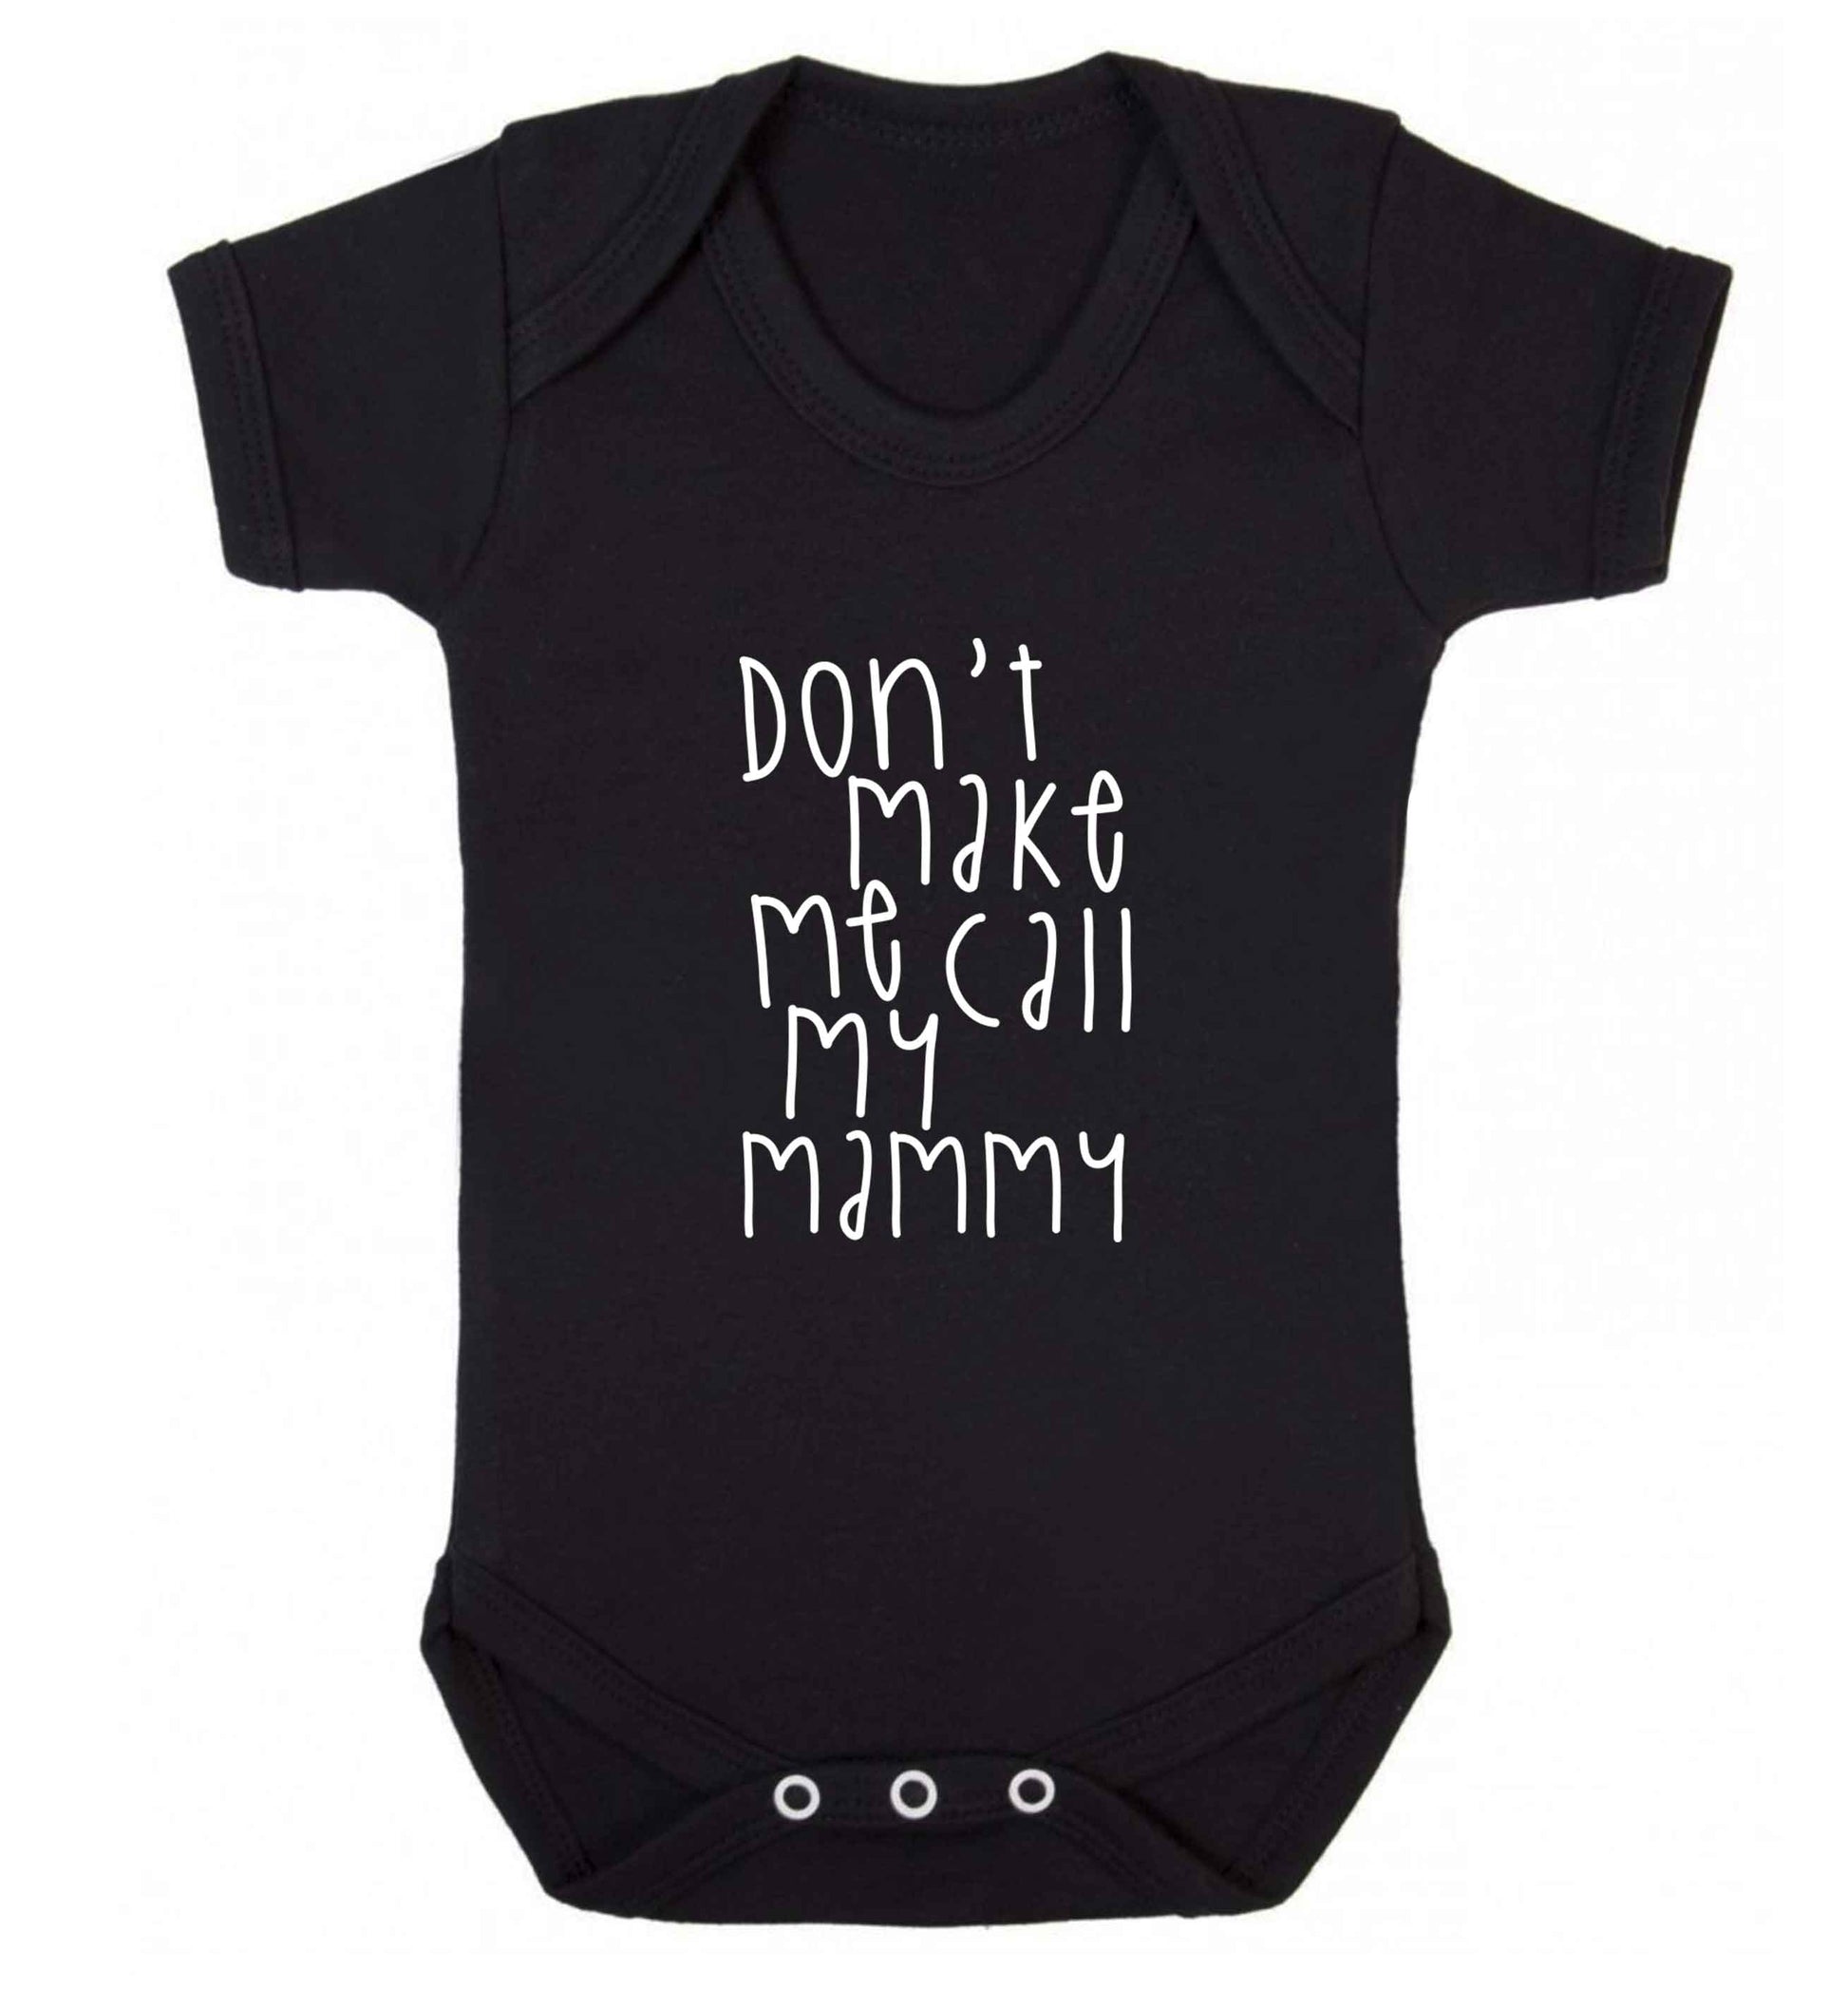 Don't make me call my mammy baby vest black 18-24 months